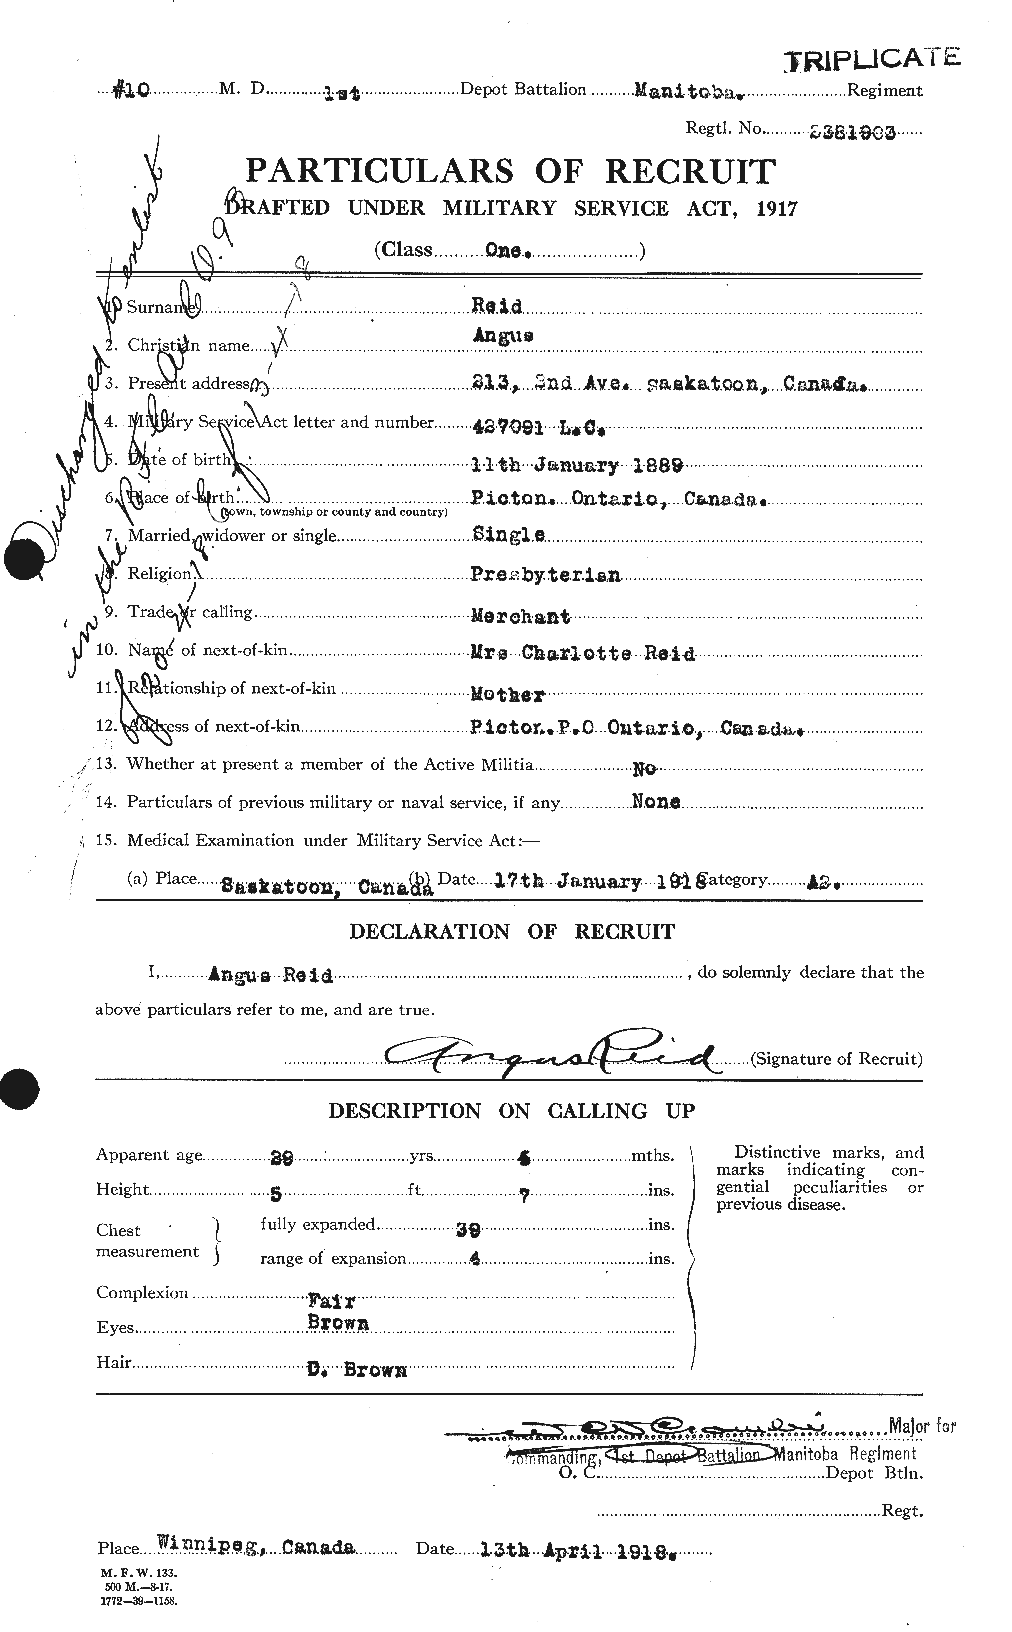 Personnel Records of the First World War - CEF 597827a